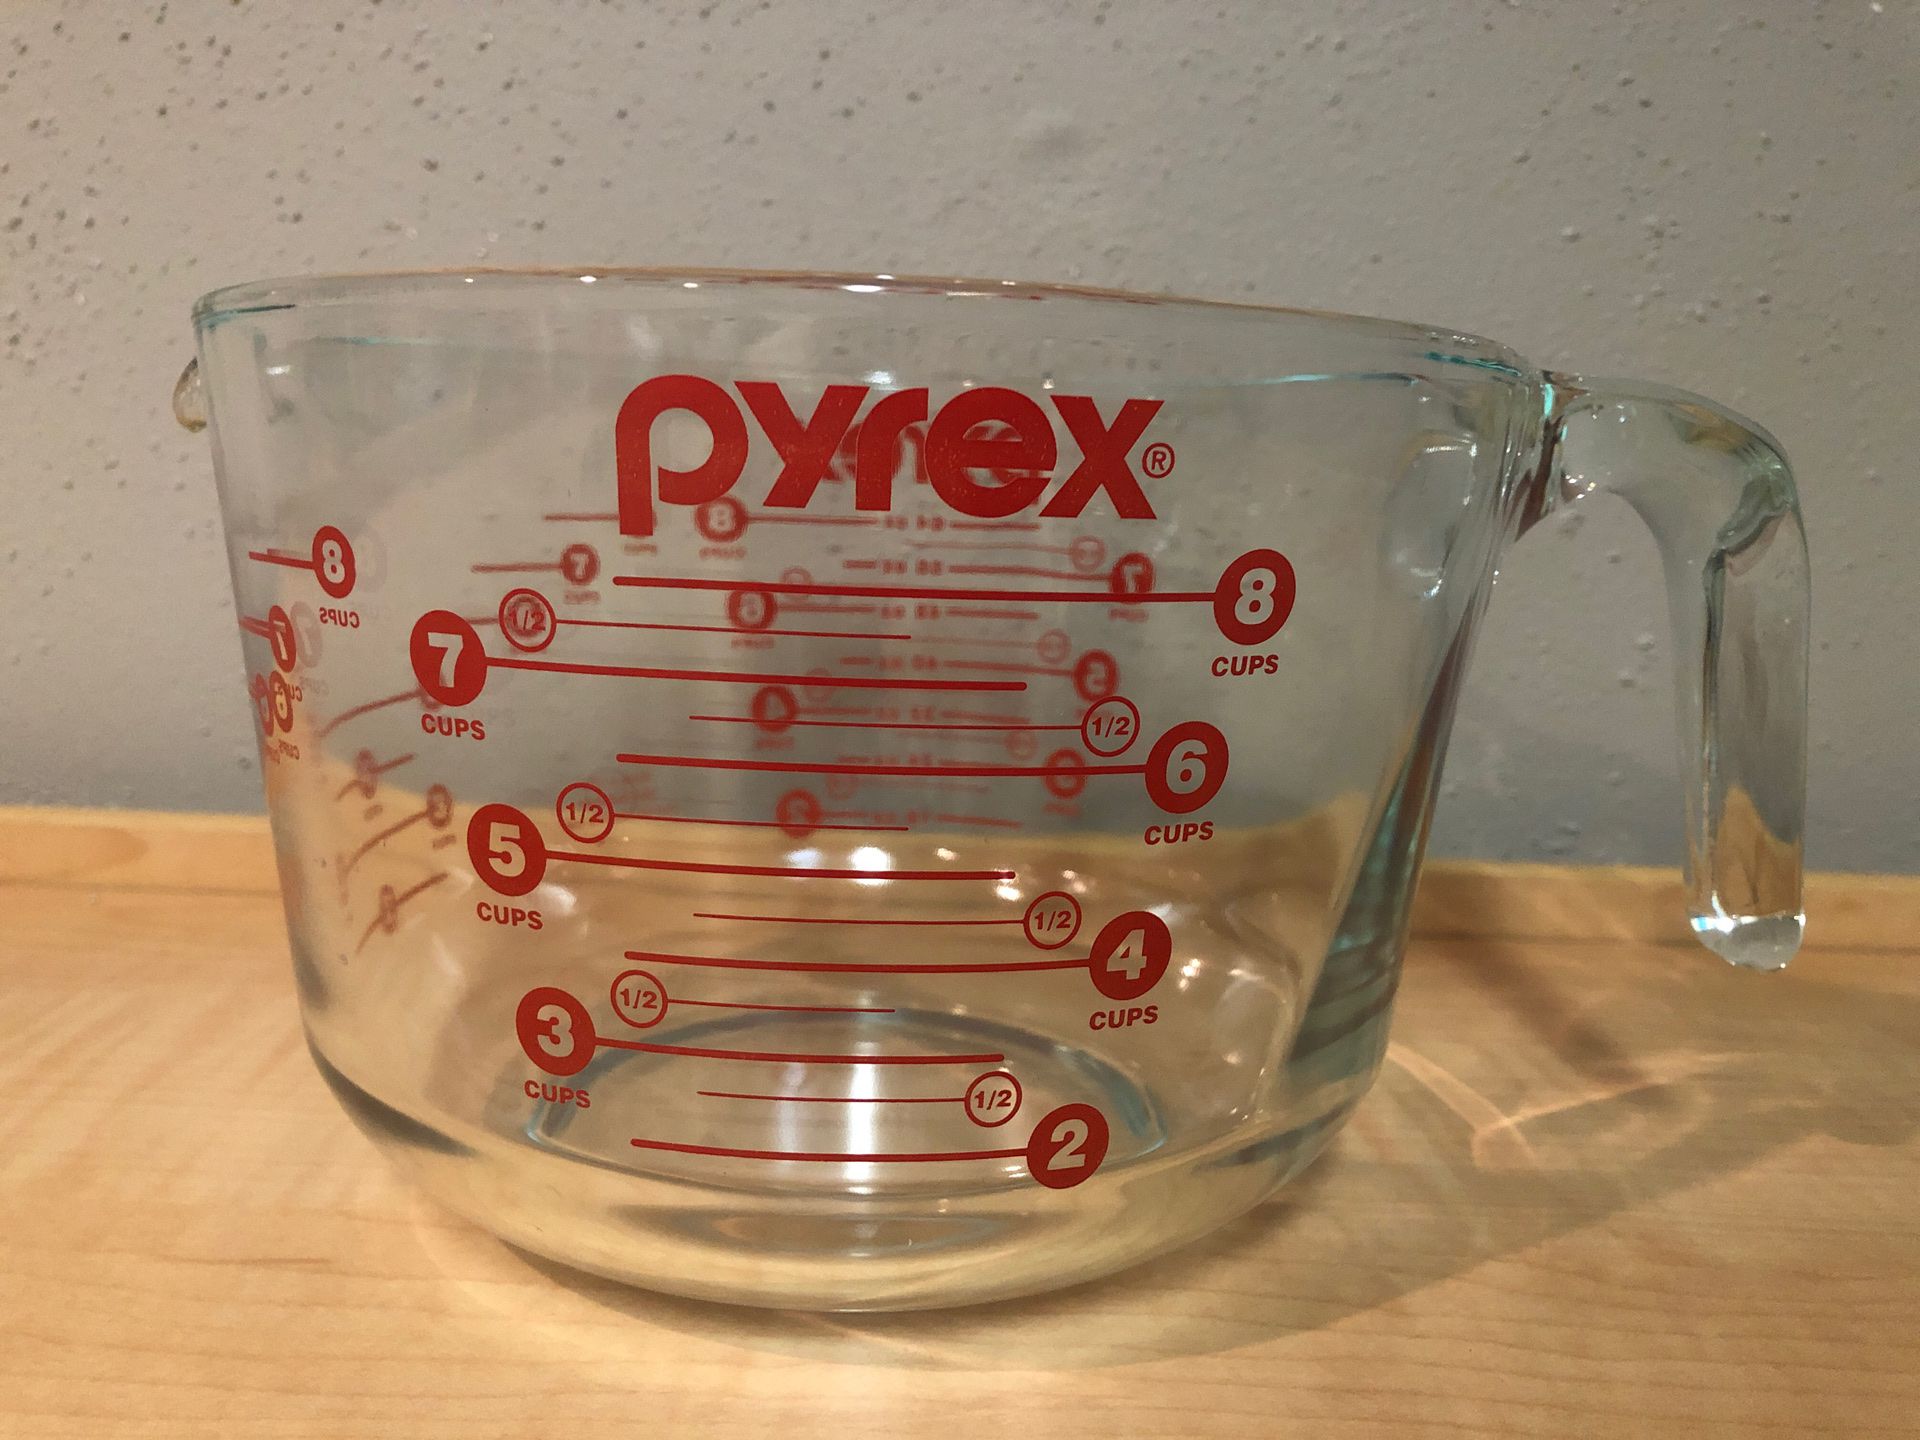 Pyrex 8 cup liquid measuring glass - Lombard pick up only